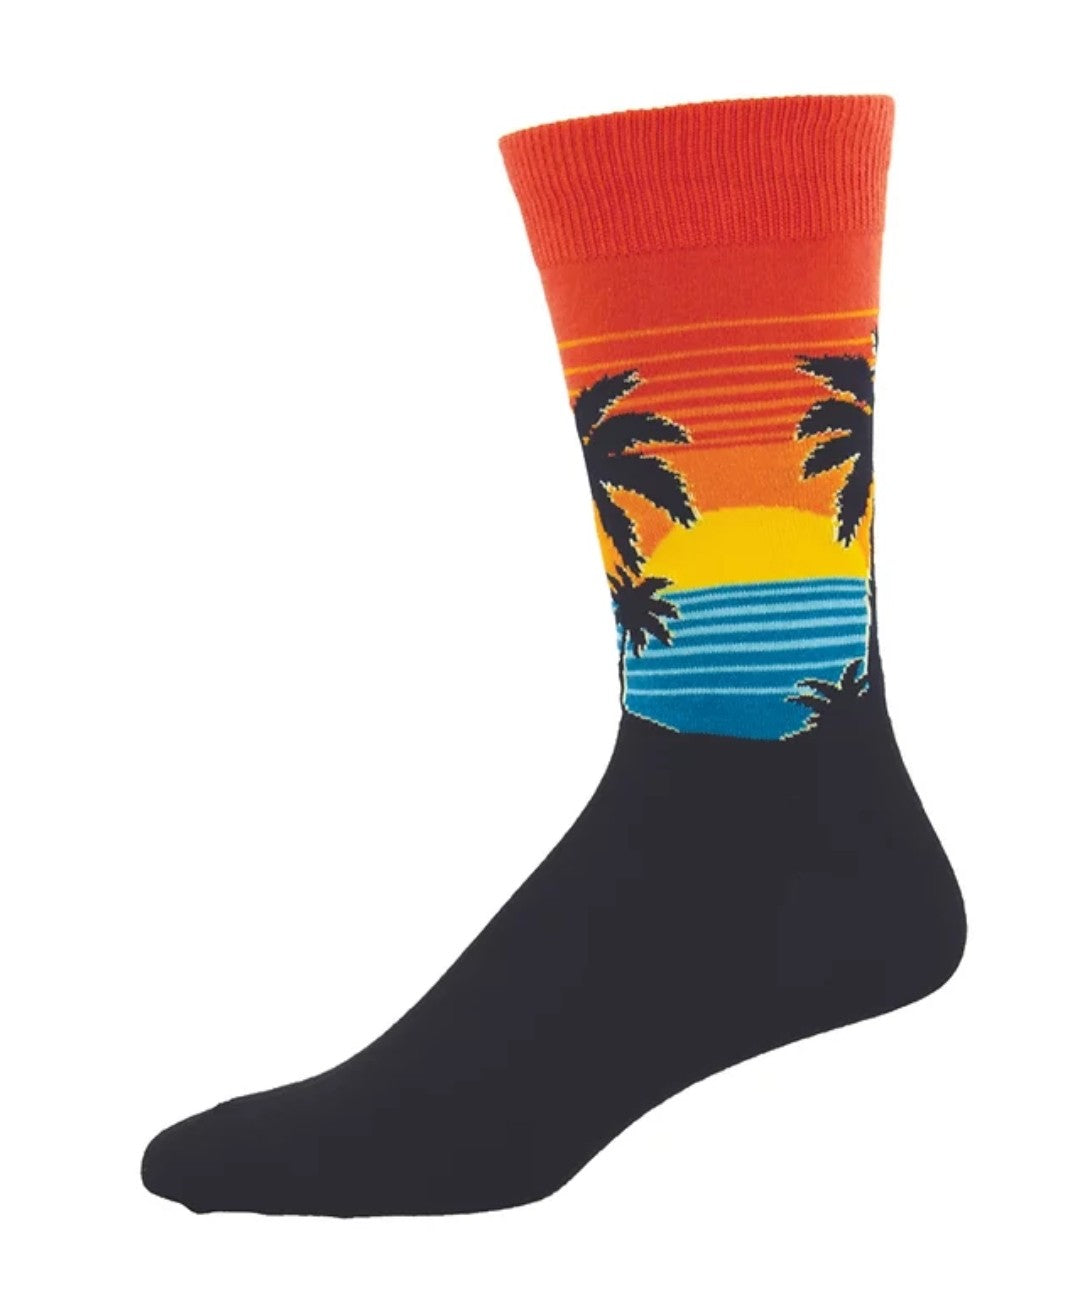 Socks - Mens - Find your beach